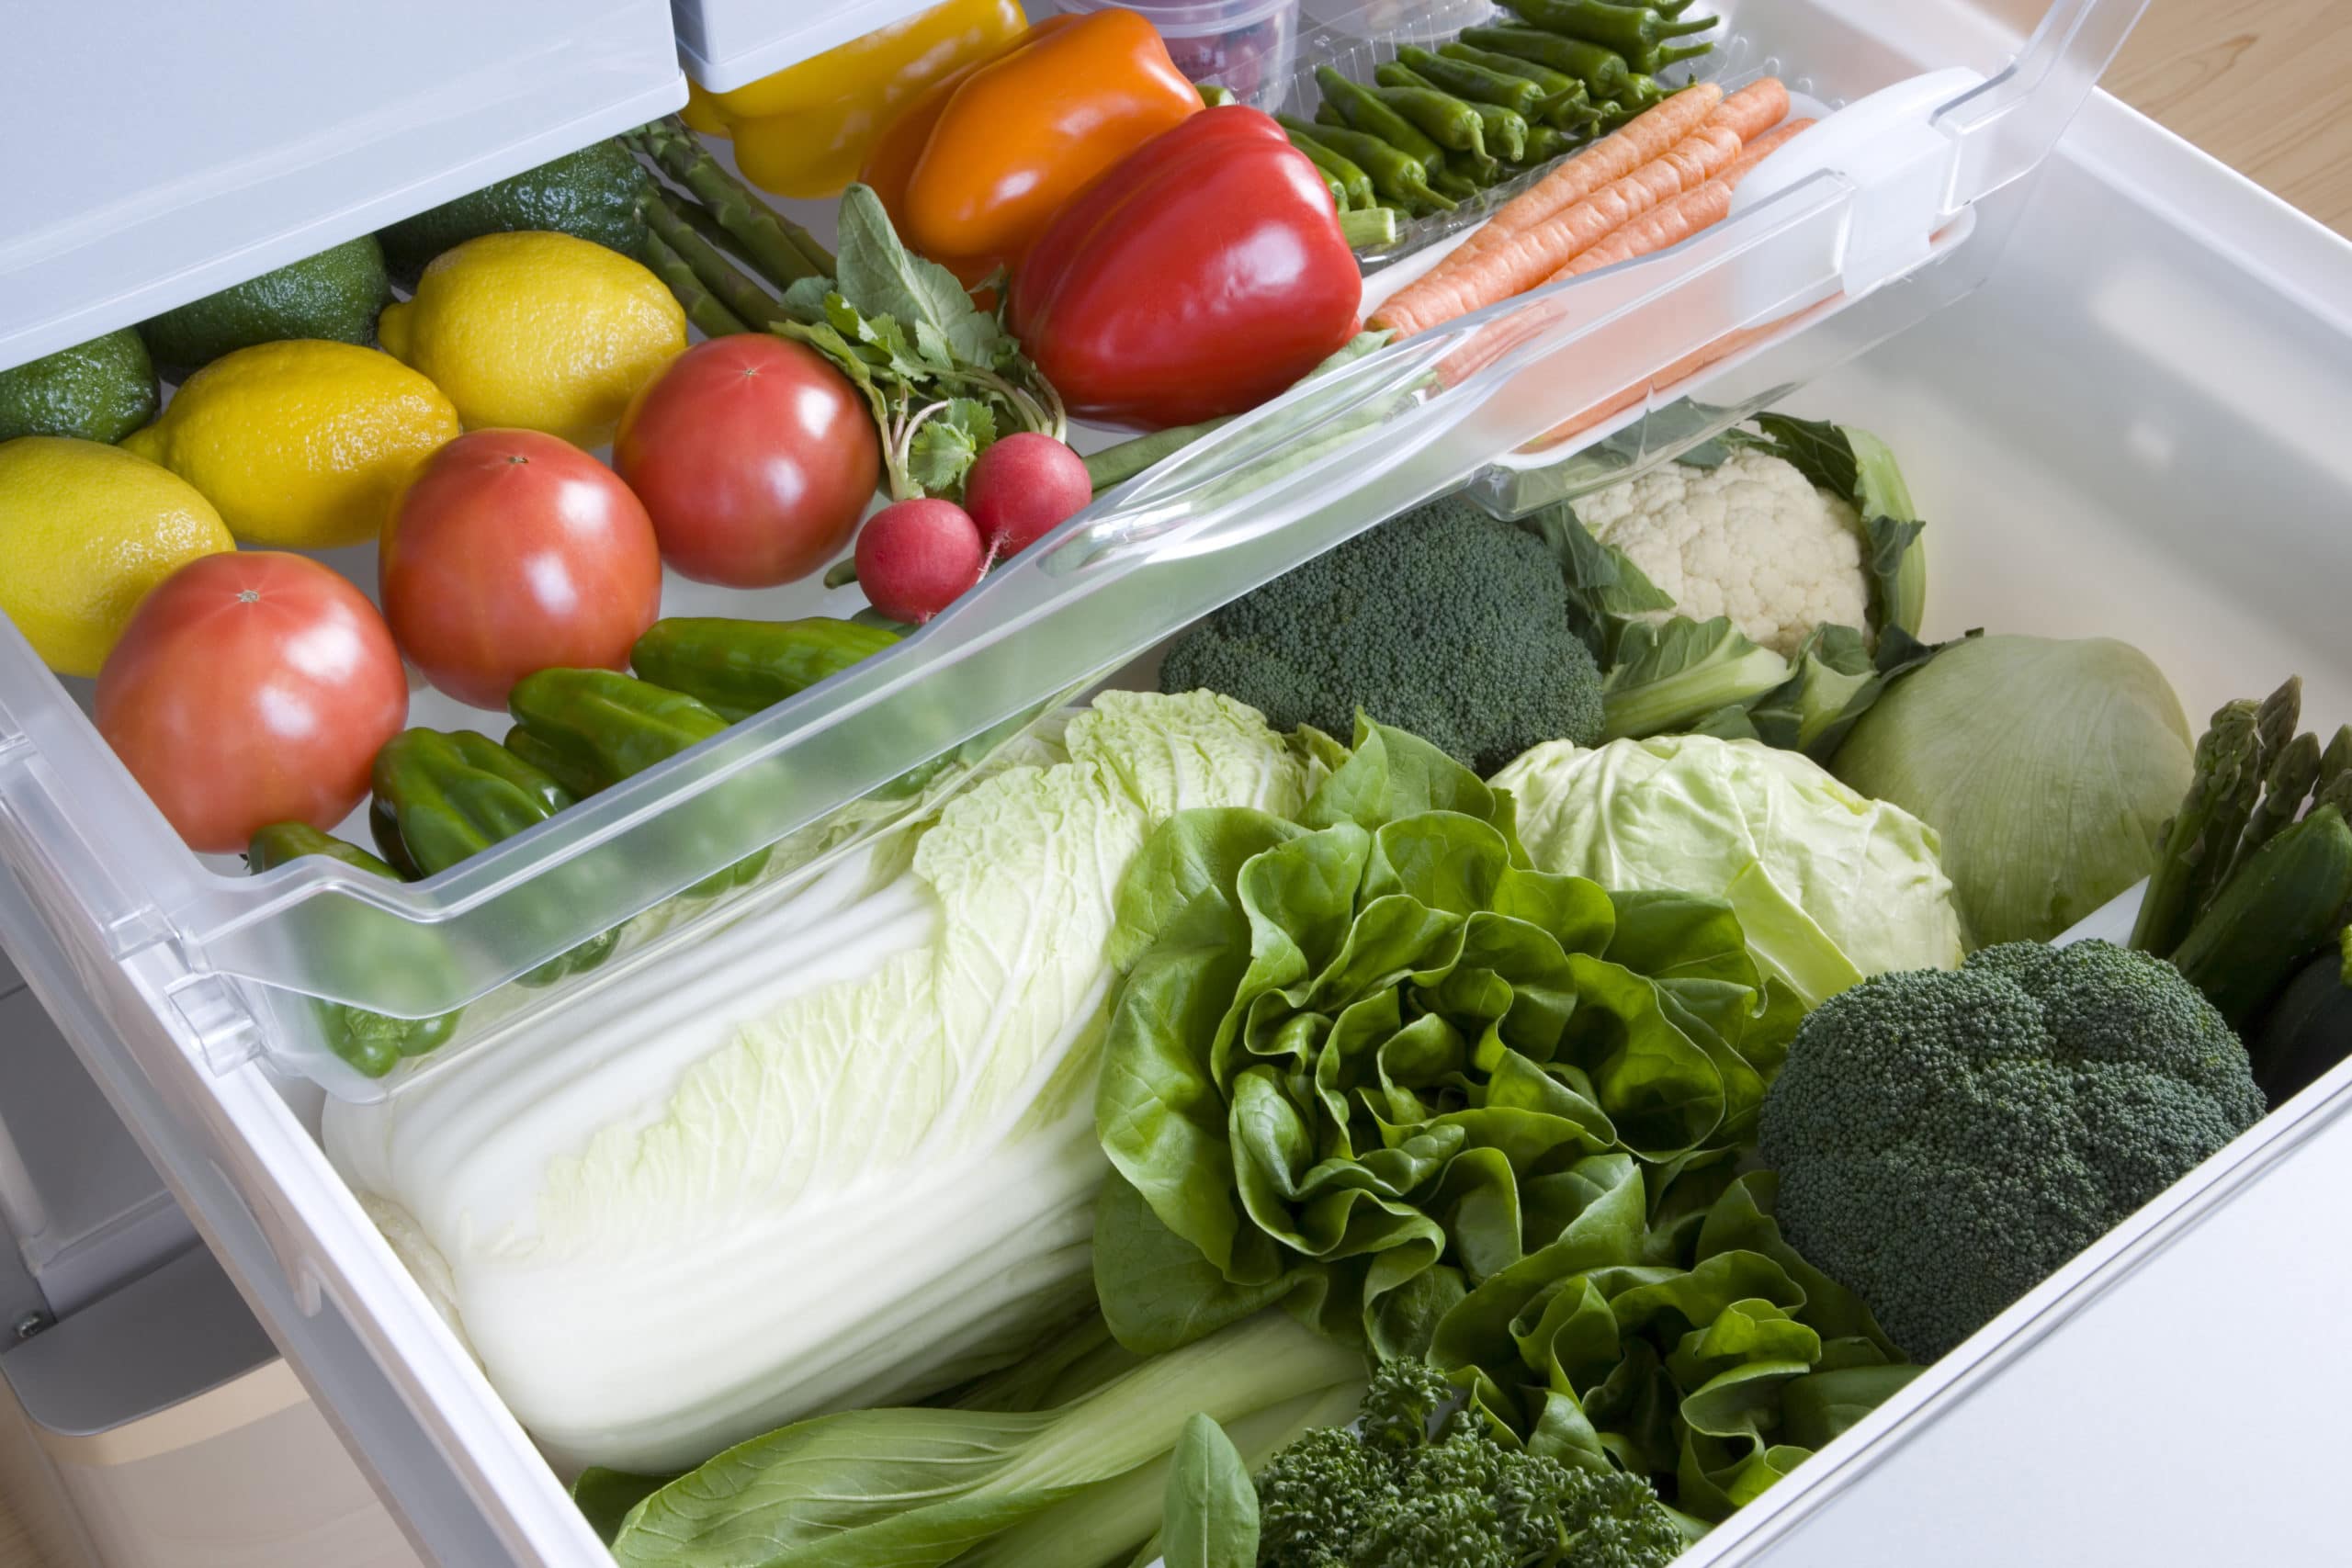 6 Ways to Store Produce to Keep it Fresh